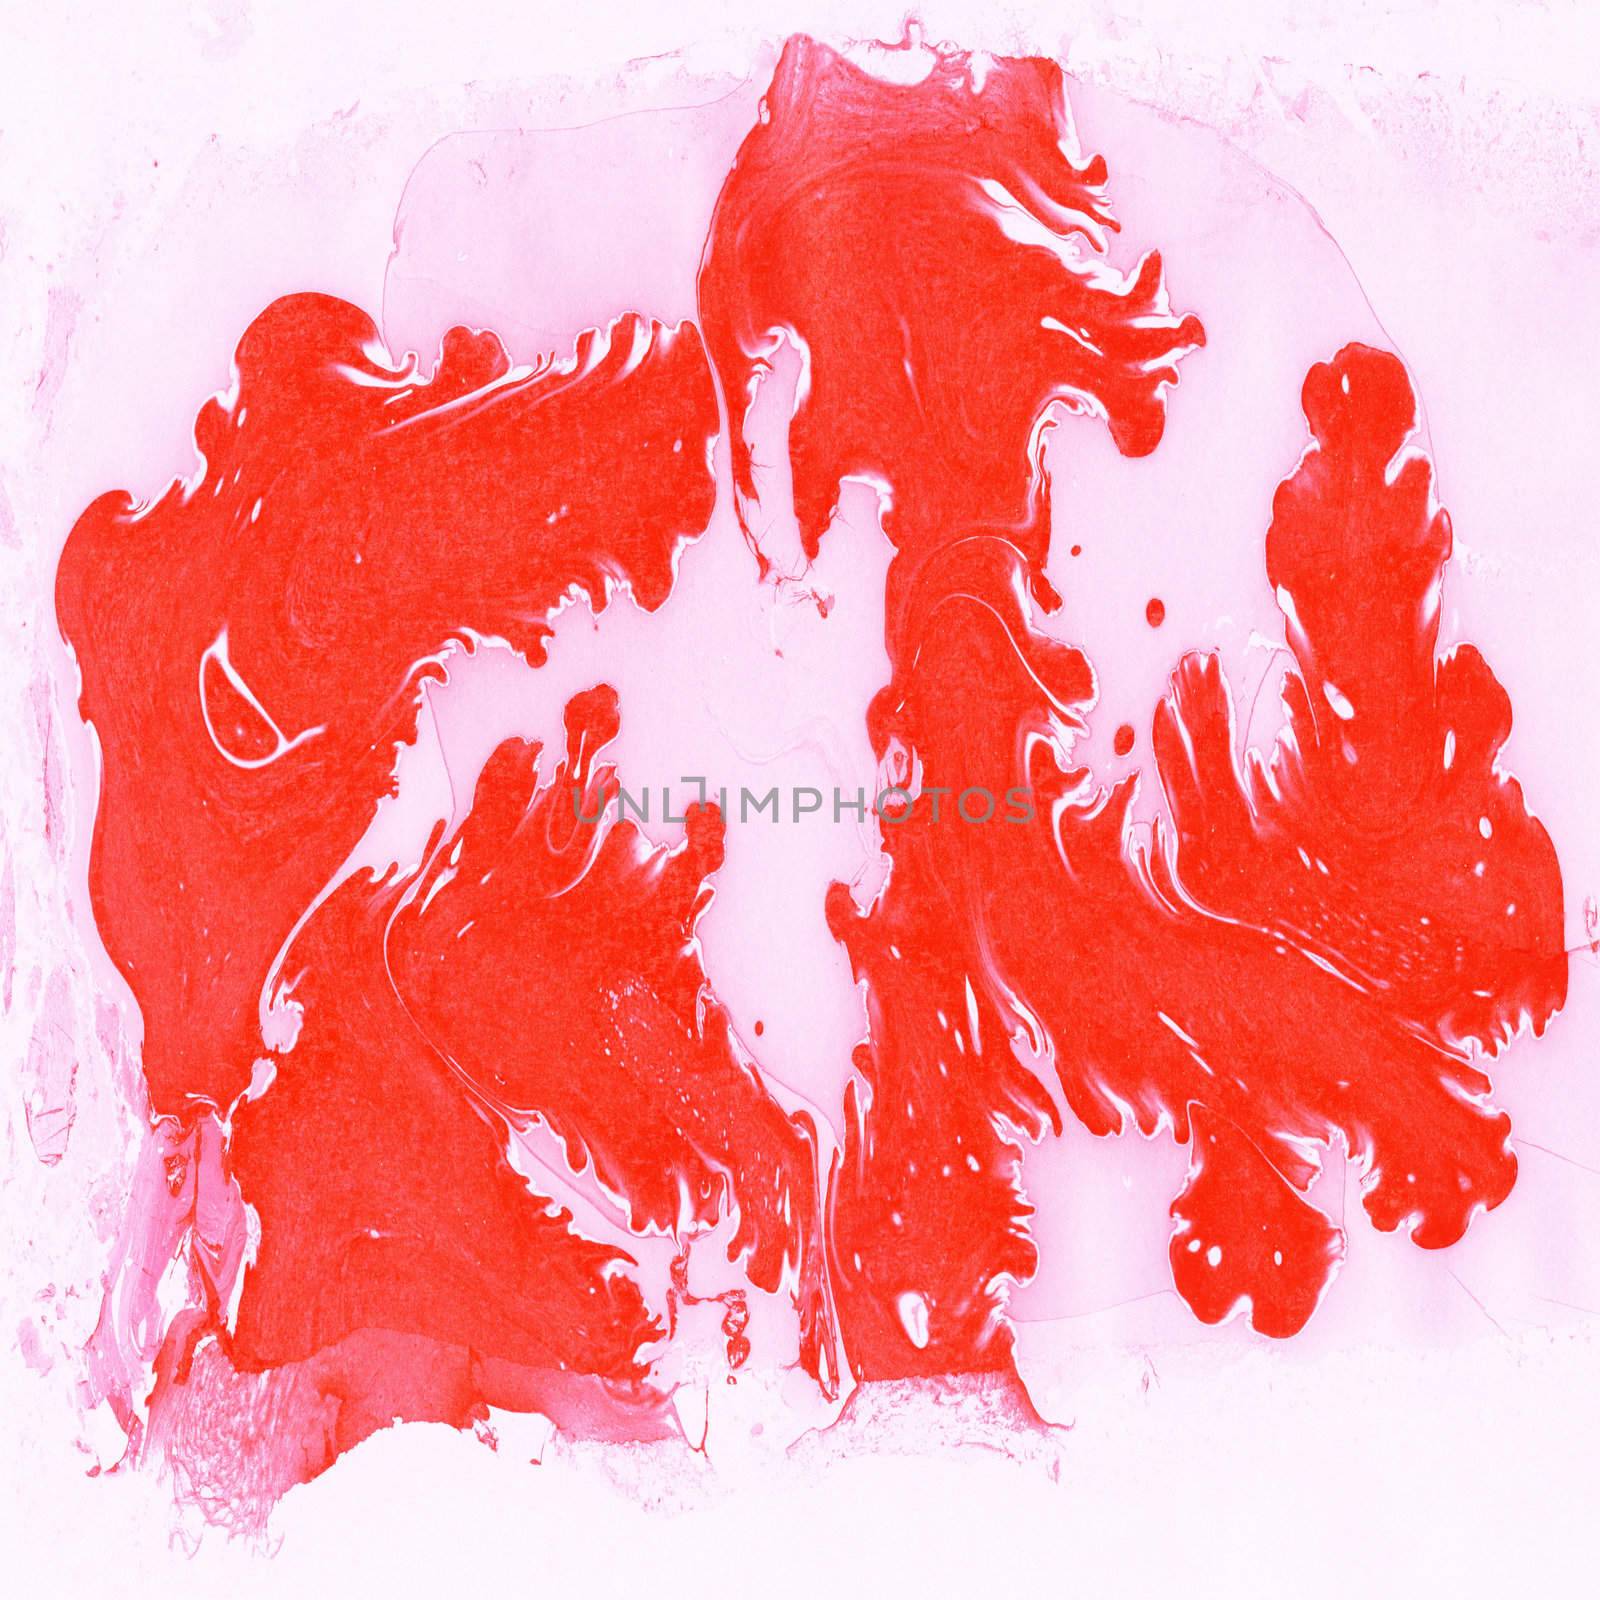 Abstract background, watercolor, hand painted on a paper. Pink, red, violet, white